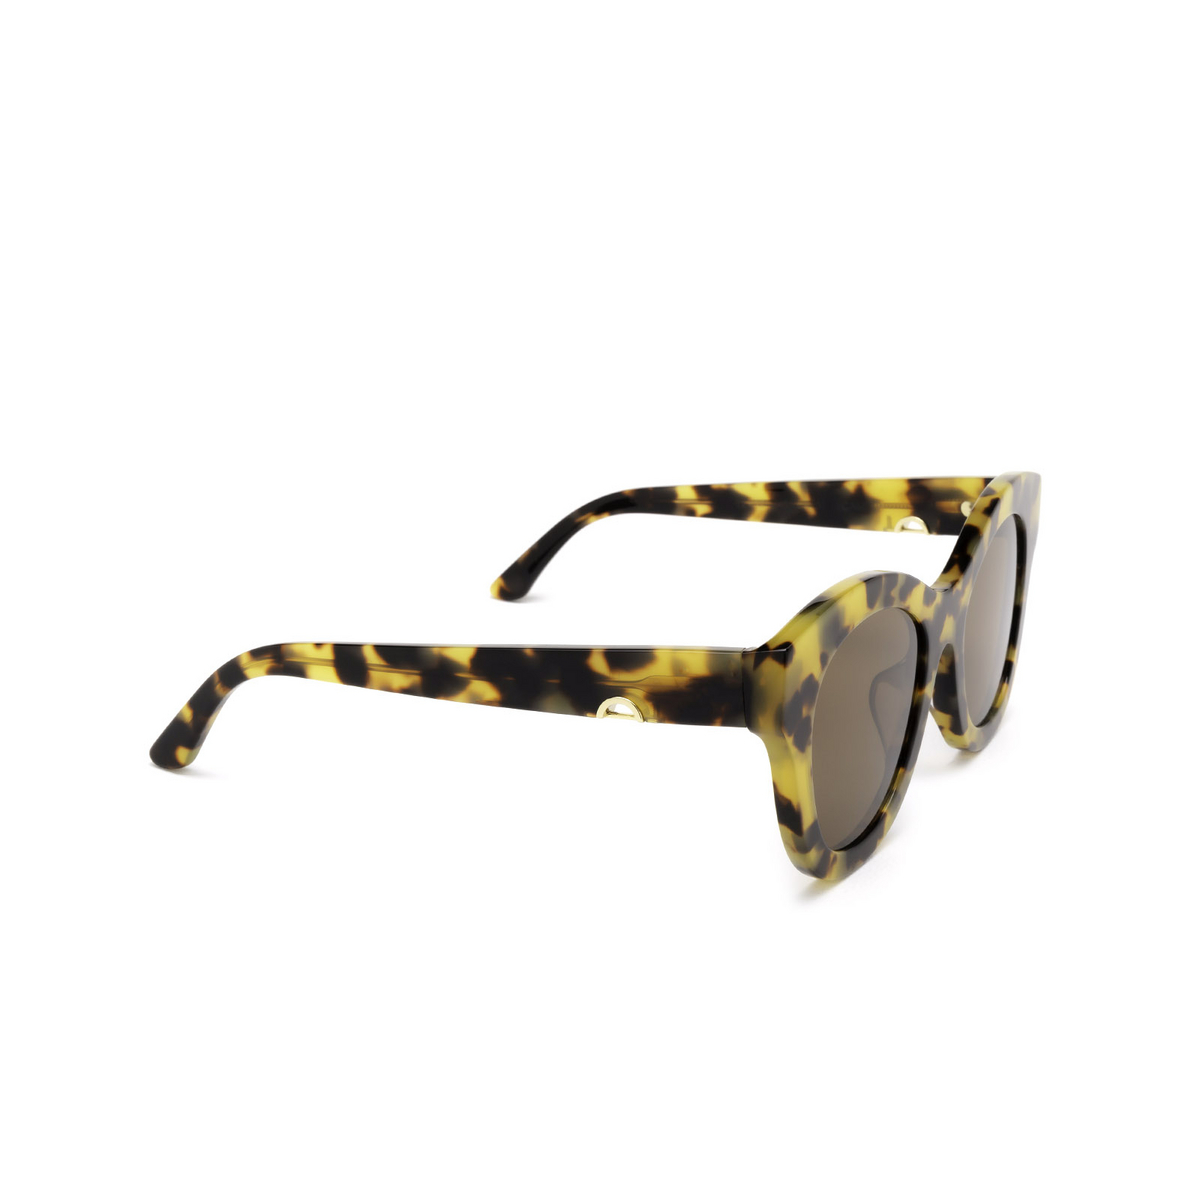 Huma® Butterfly Sunglasses: Cami color Maculate 19 - three-quarters view.